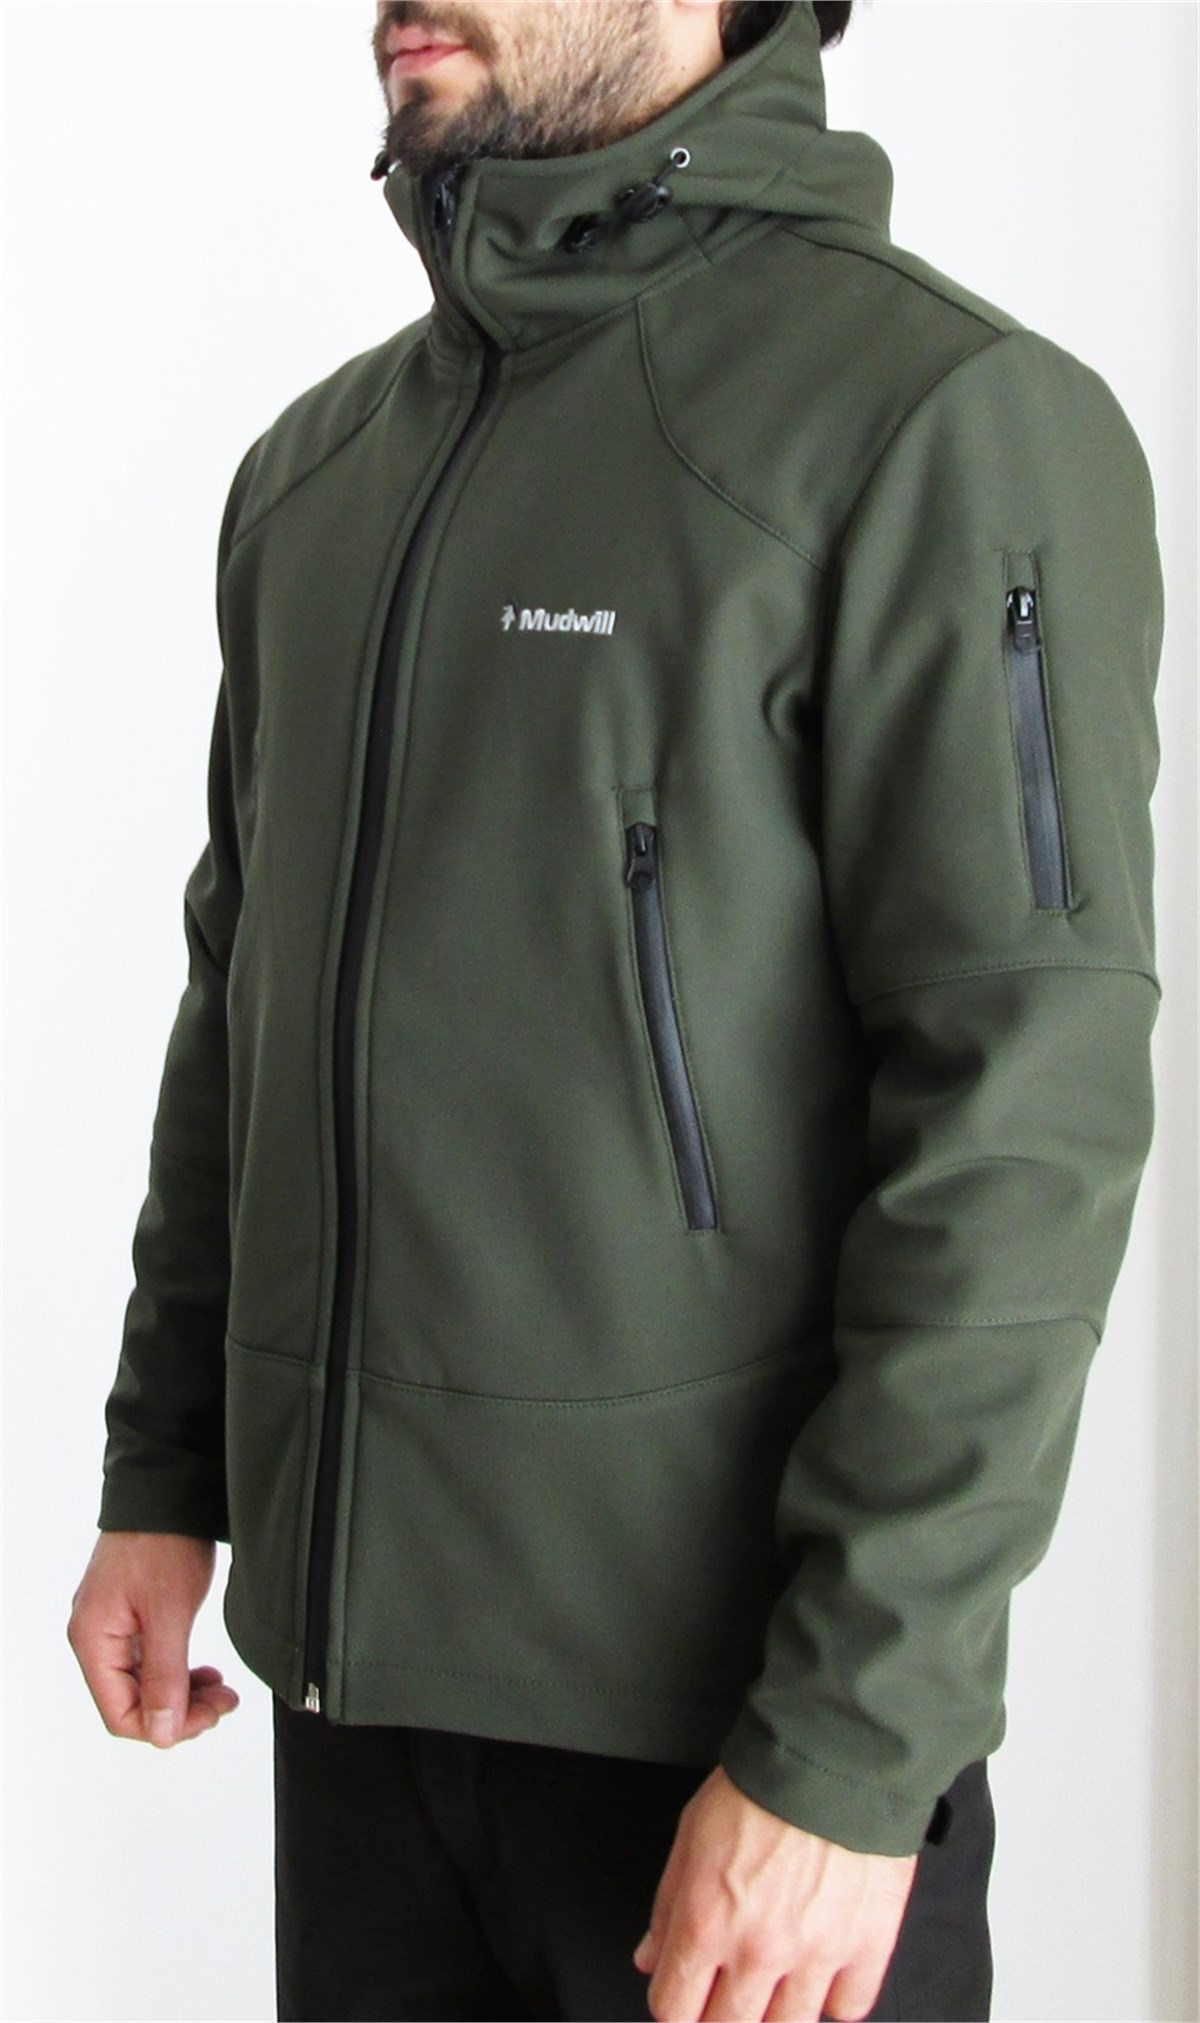 Mudwill Softshell Outdoor Mont